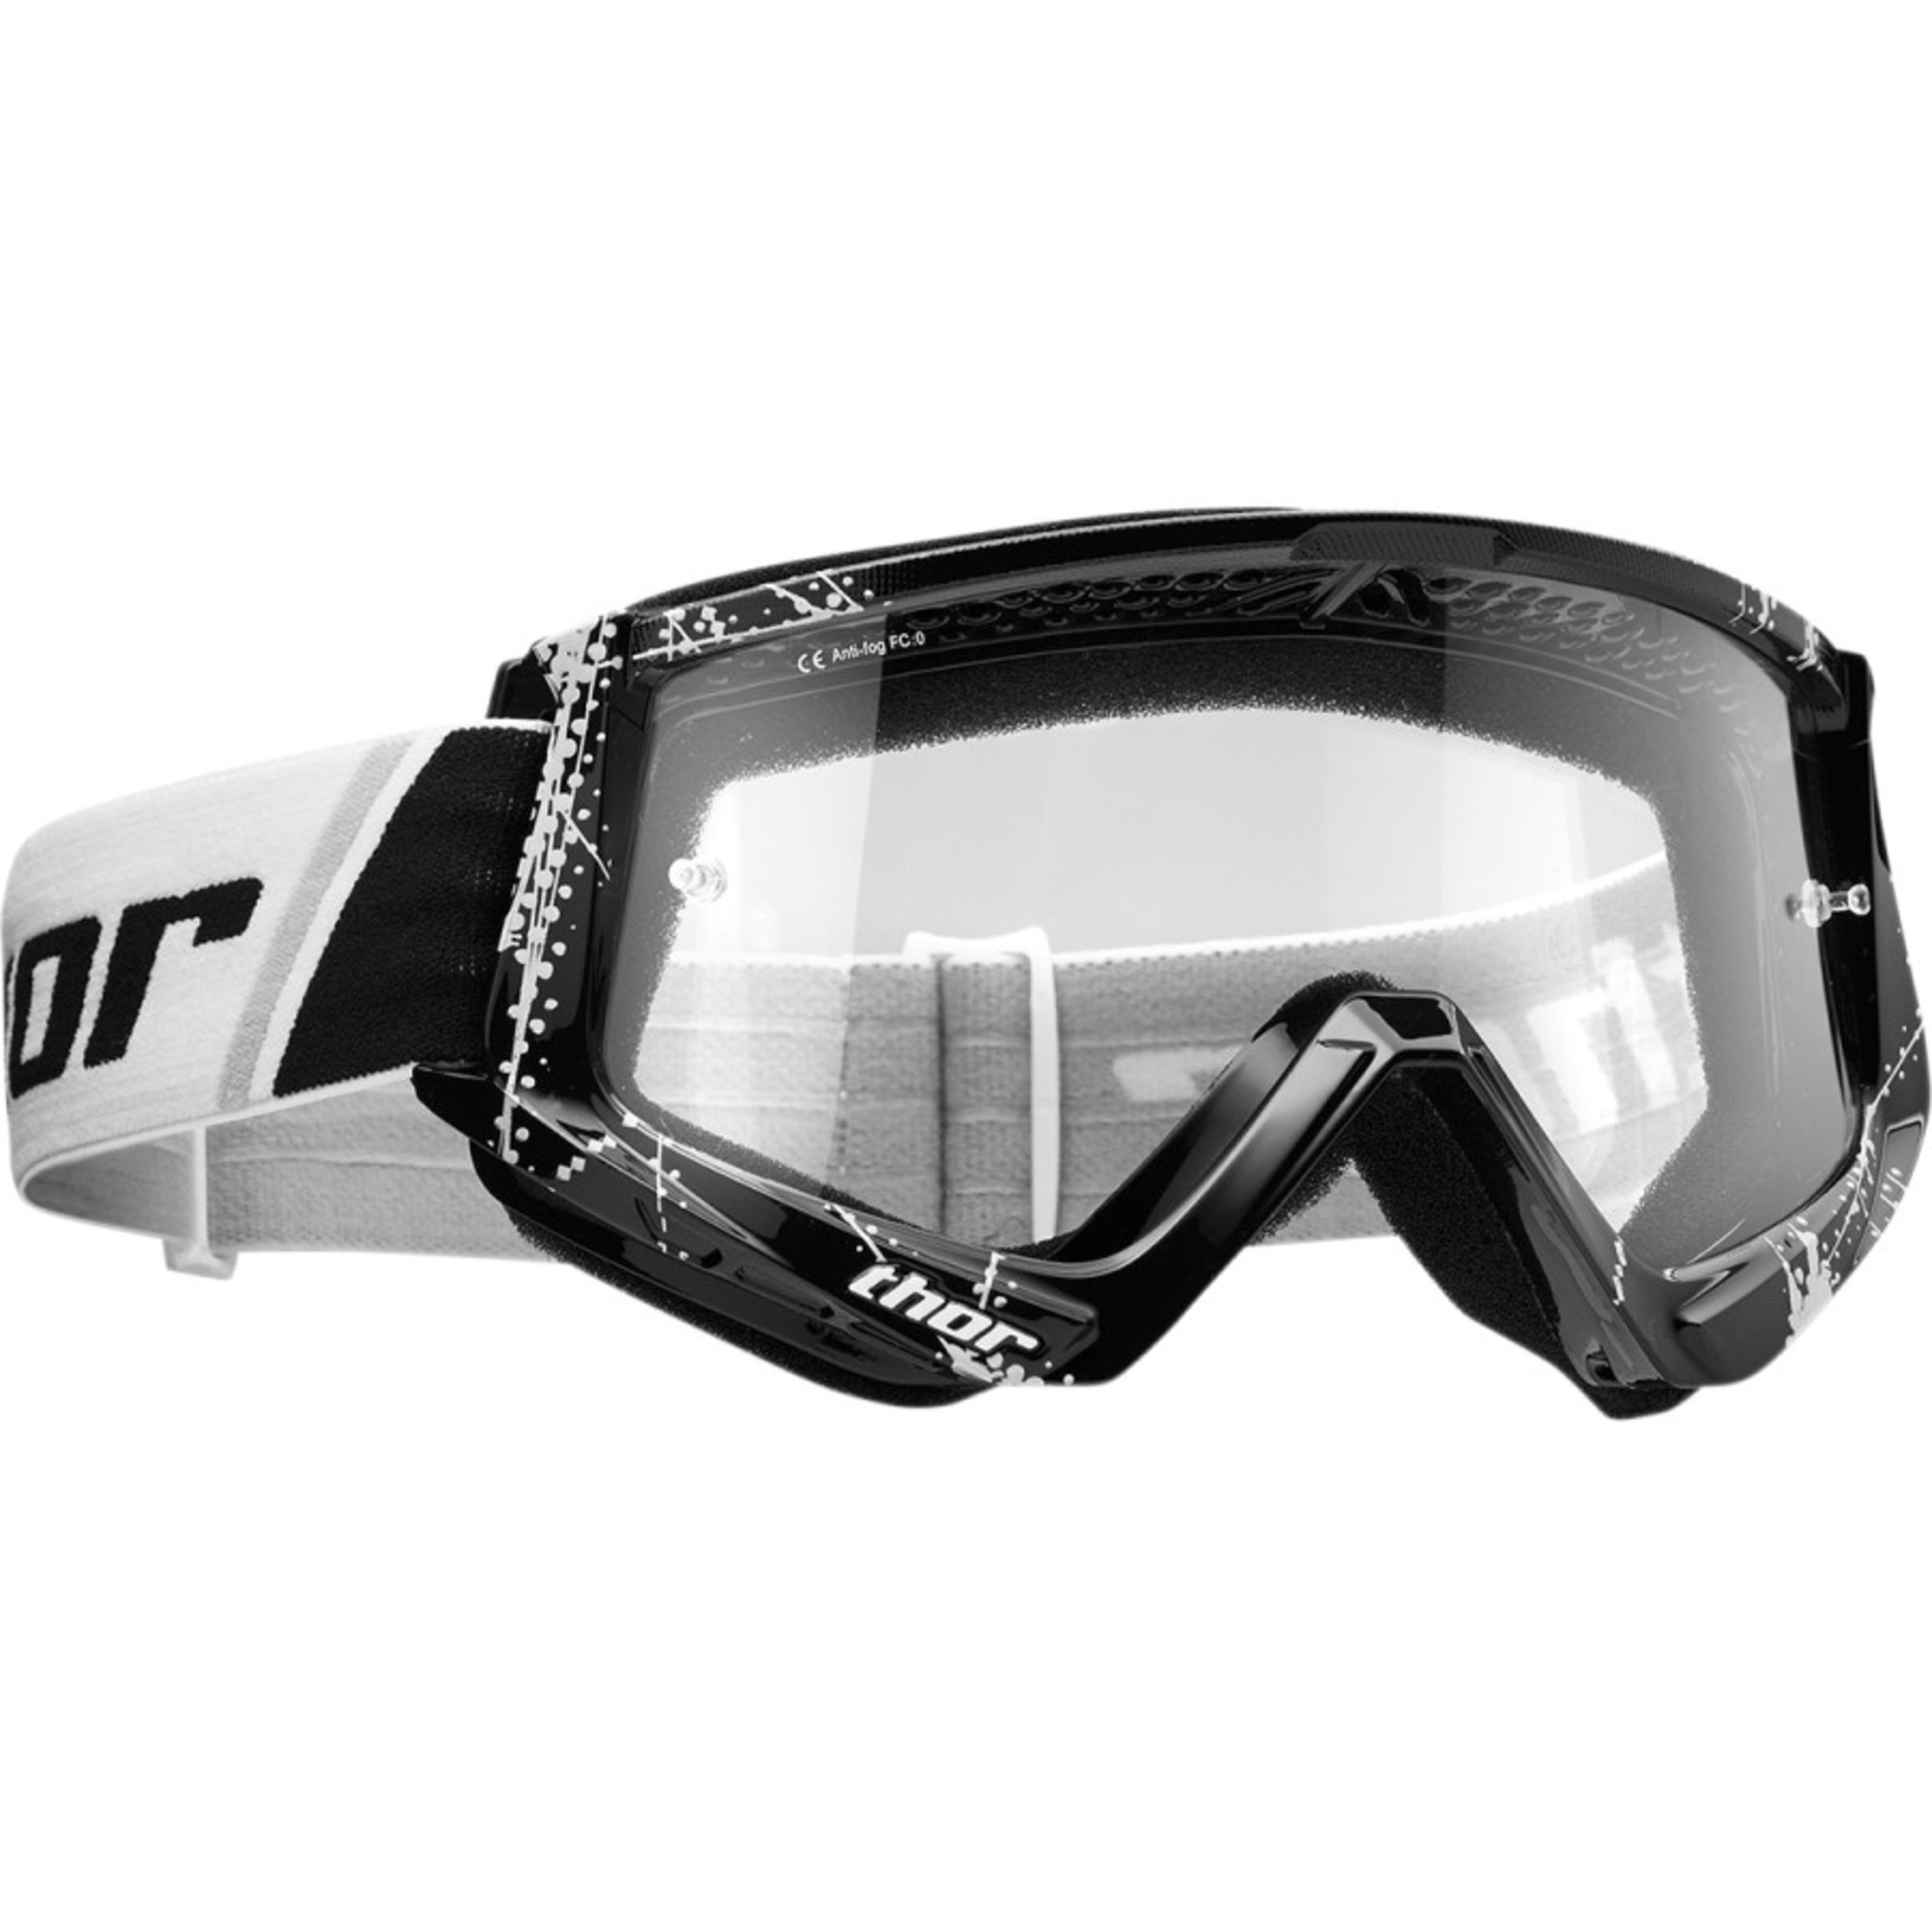 thor goggles for kids combat web